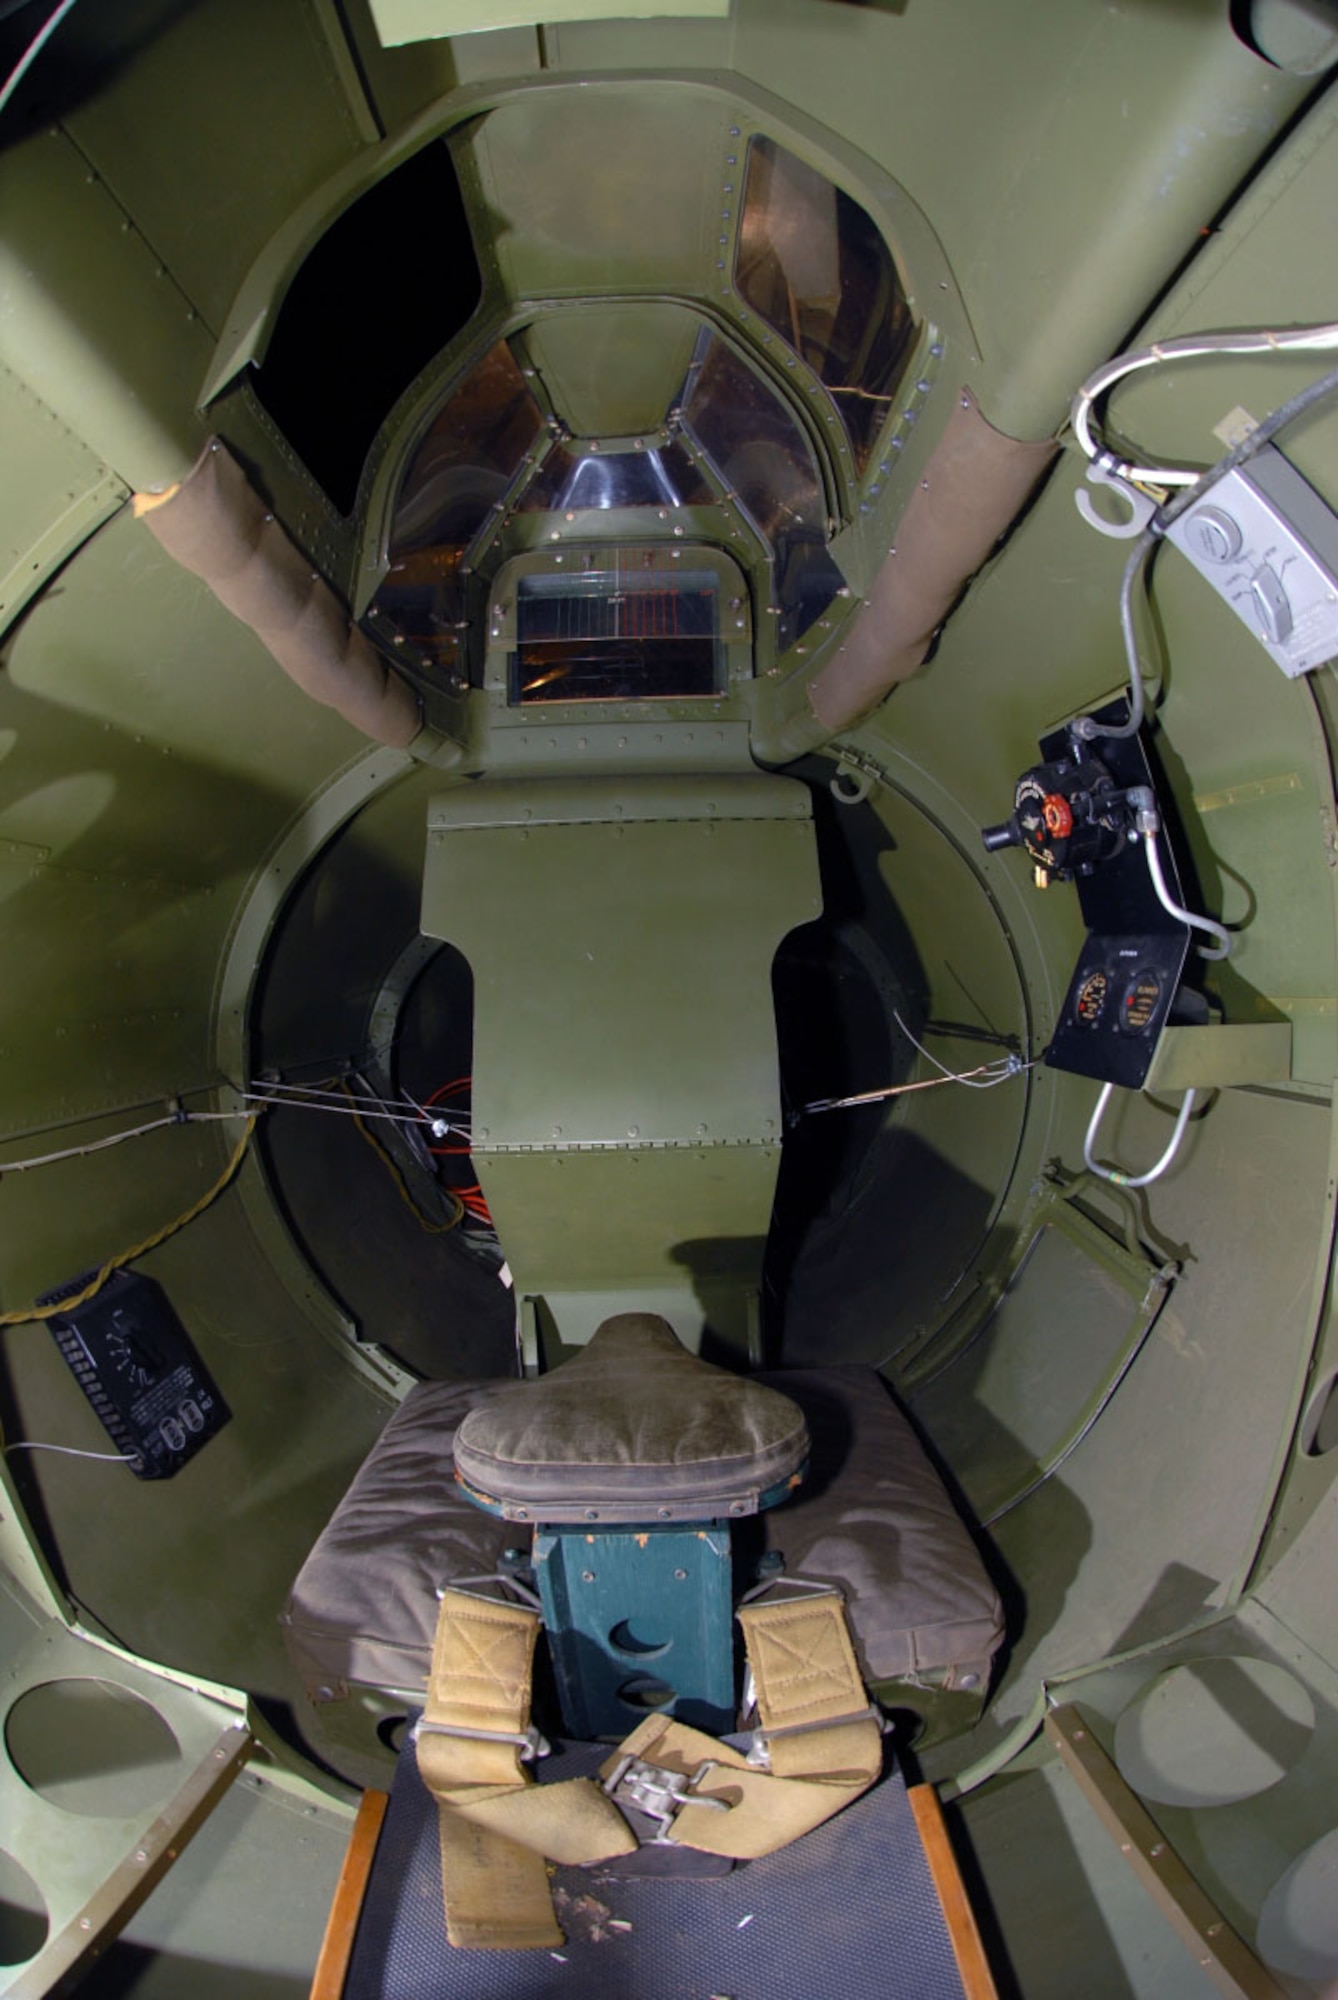 DAYTON, Ohio -- Rear gunner position in the Boeing B-17G "Shoo Shoo Shoo Baby" at the National Museum of the United States Air Force. (U.S. Air Force photo)